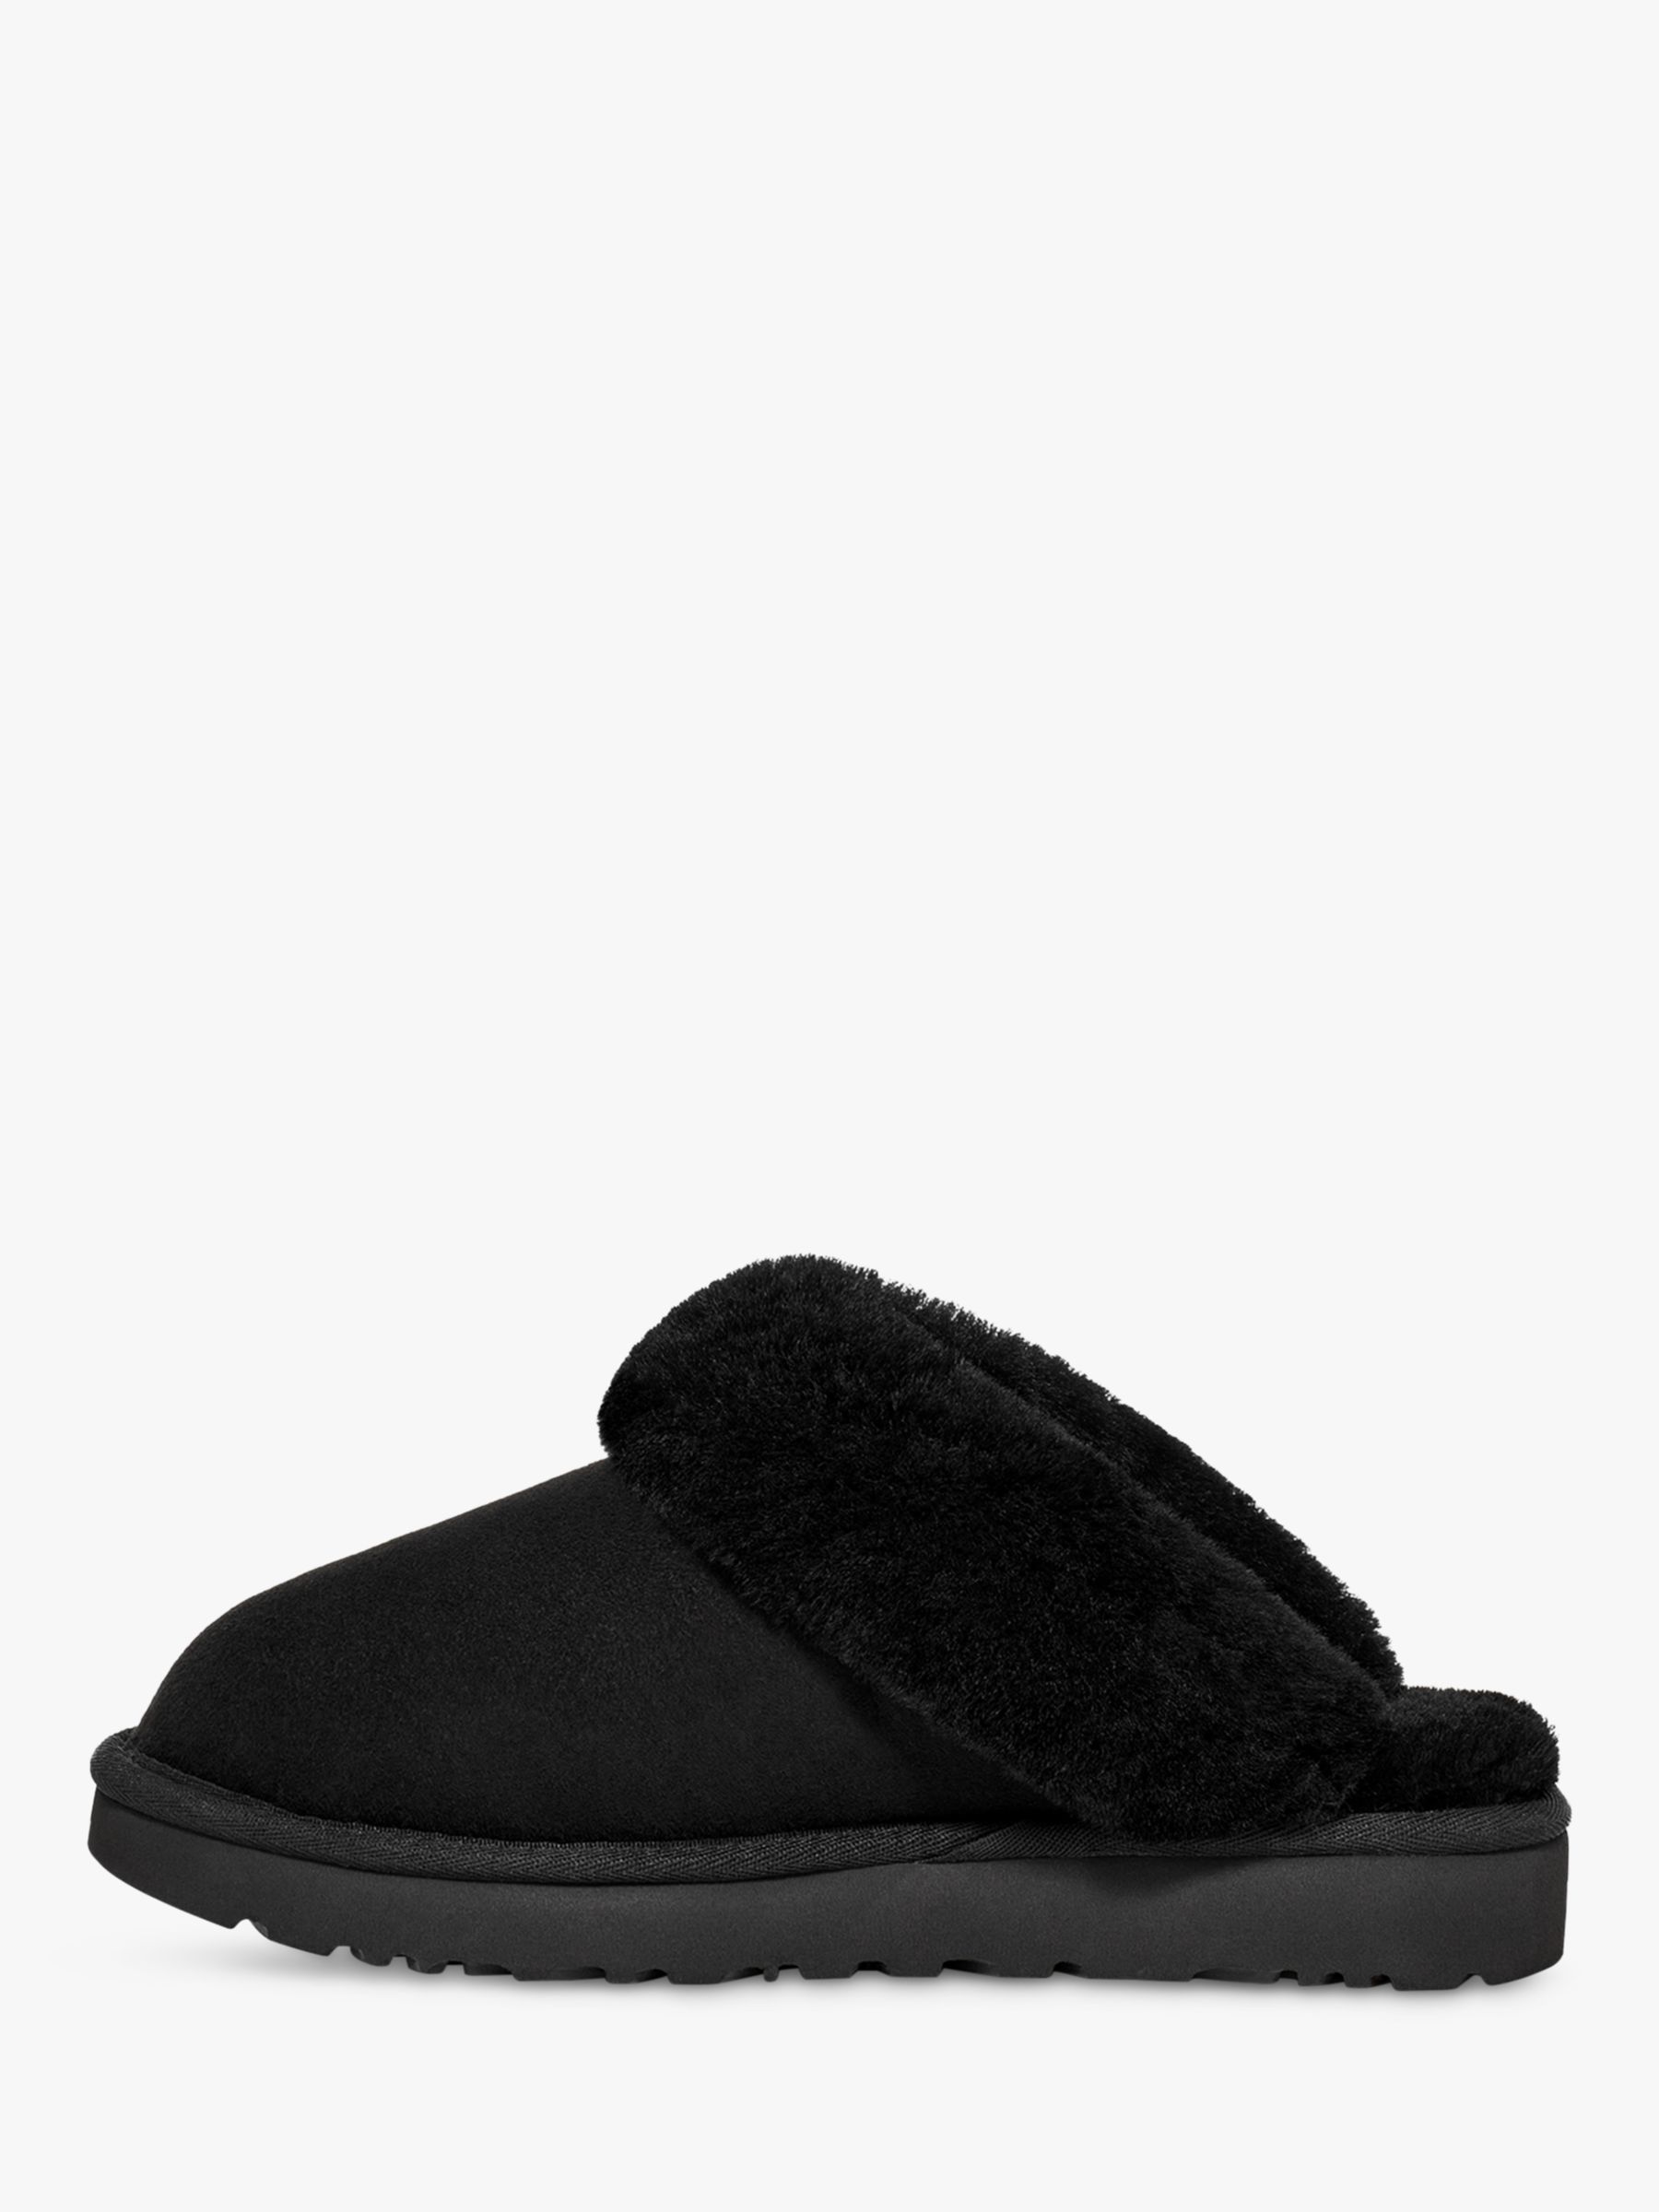 UGG Classic Suede Slippers, Black at John Lewis & Partners